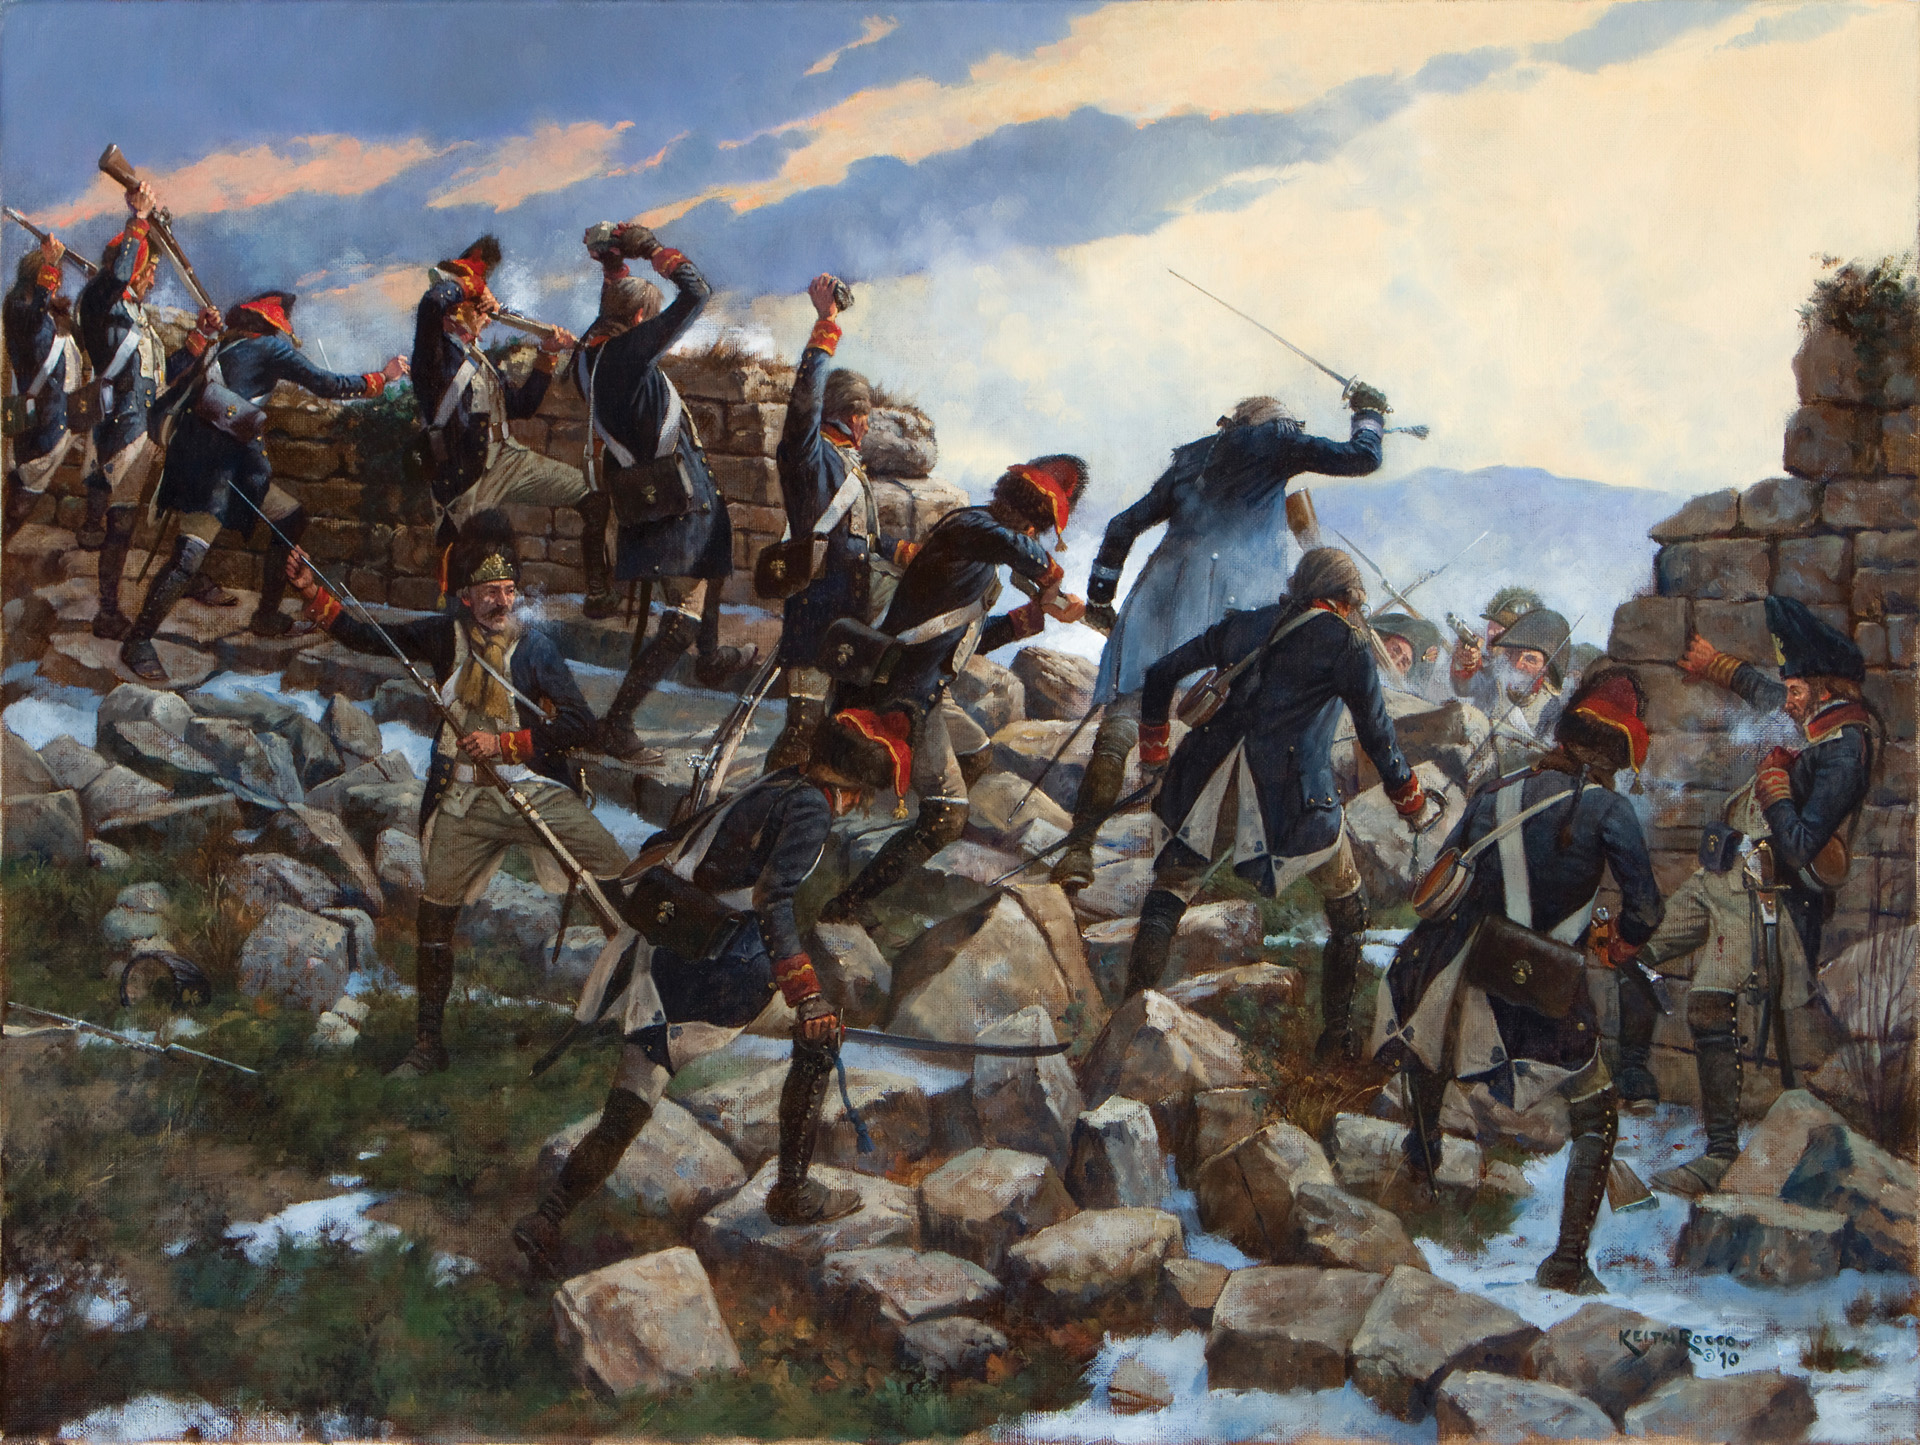 A Sardinian battalion of elite grenadiers held off three separate attacks by French General Pierre Augereau’s division on their position in the ruins of a medieval castle at Cosseria on April 13, 1796. When the grenadiers ran low on ammunition, they hurled rocks at the French.